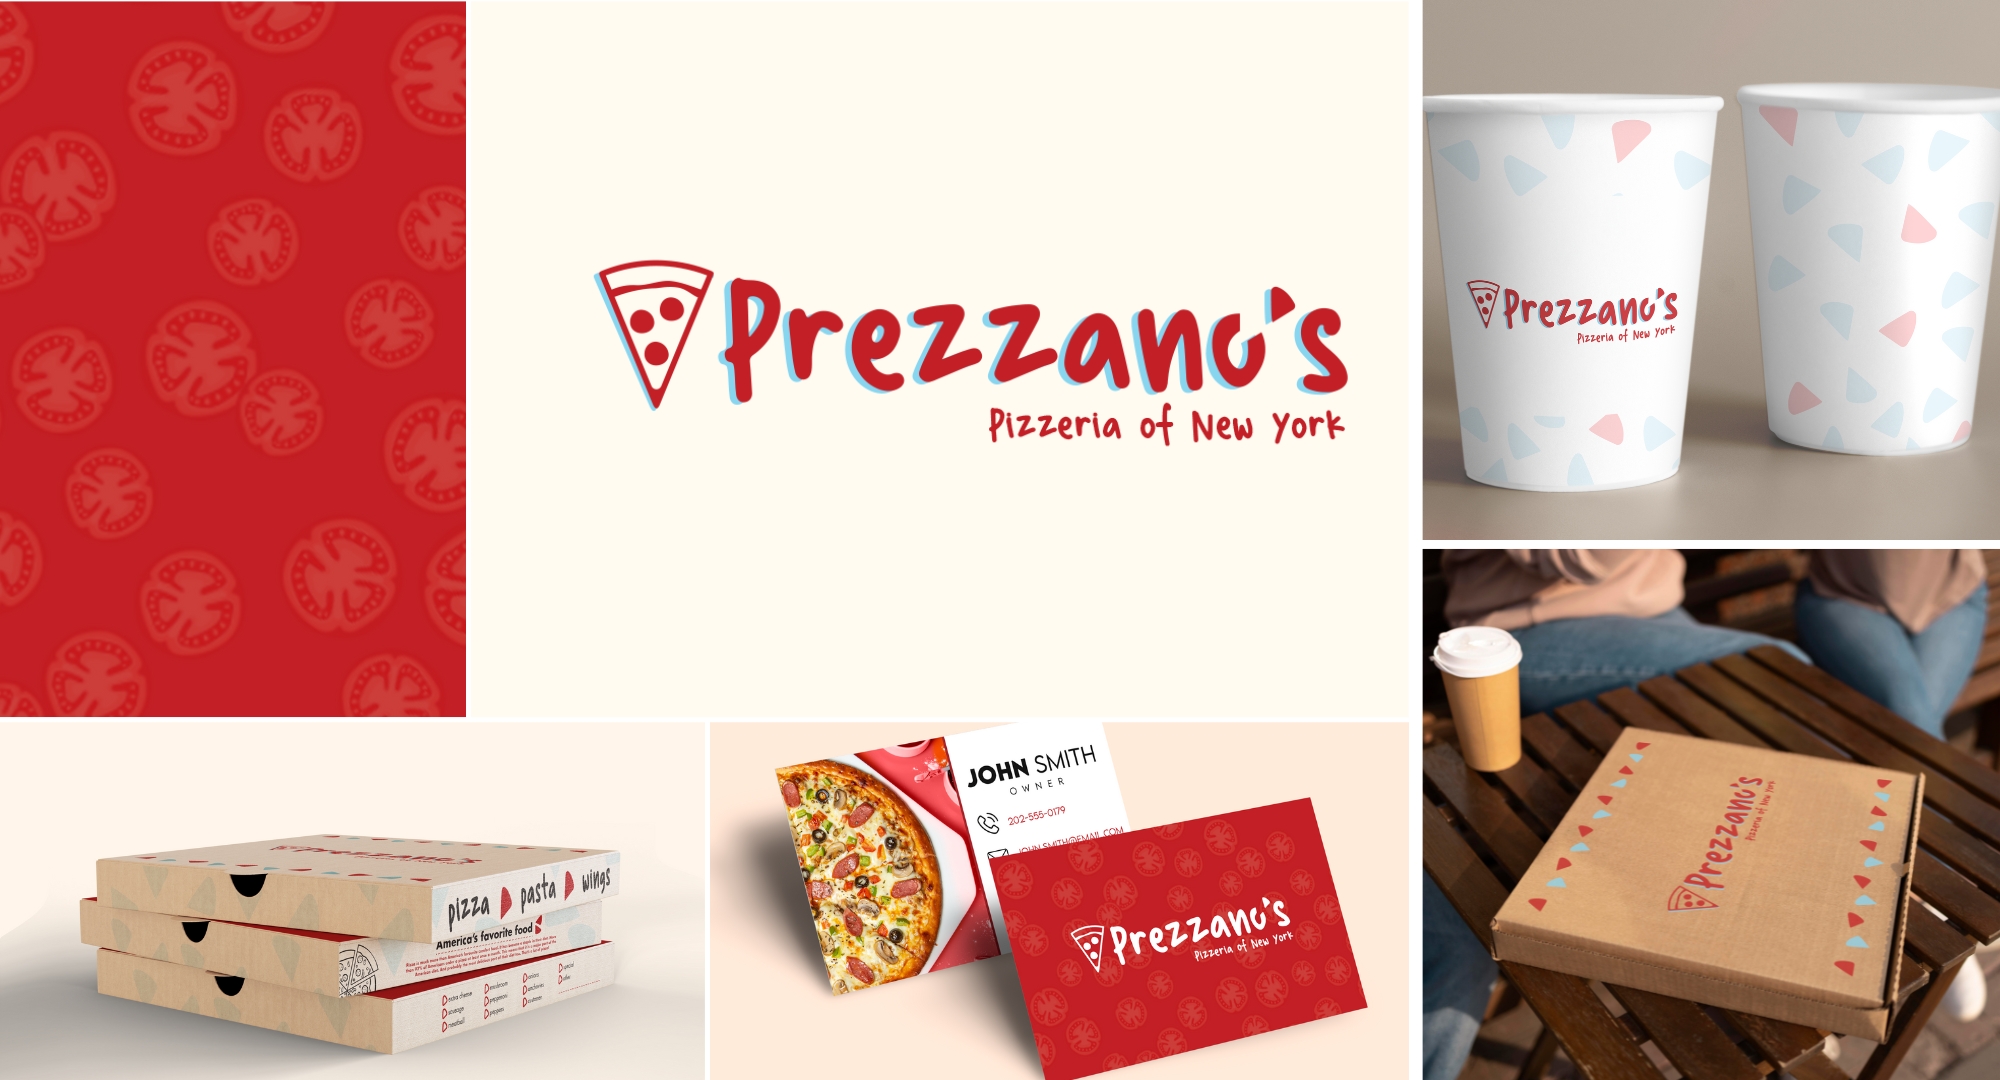 "Prezzano's Pizza Logo & Packaging" / "Prezzano's Pizza Logo & Packaging", logo & assorted packaging, various sizes printed, 2023. Prezzano's is a small business selling pizza, pasta, & more. With the redesign of their old logo, I wanted to keep the red & blue of their original branding to ke